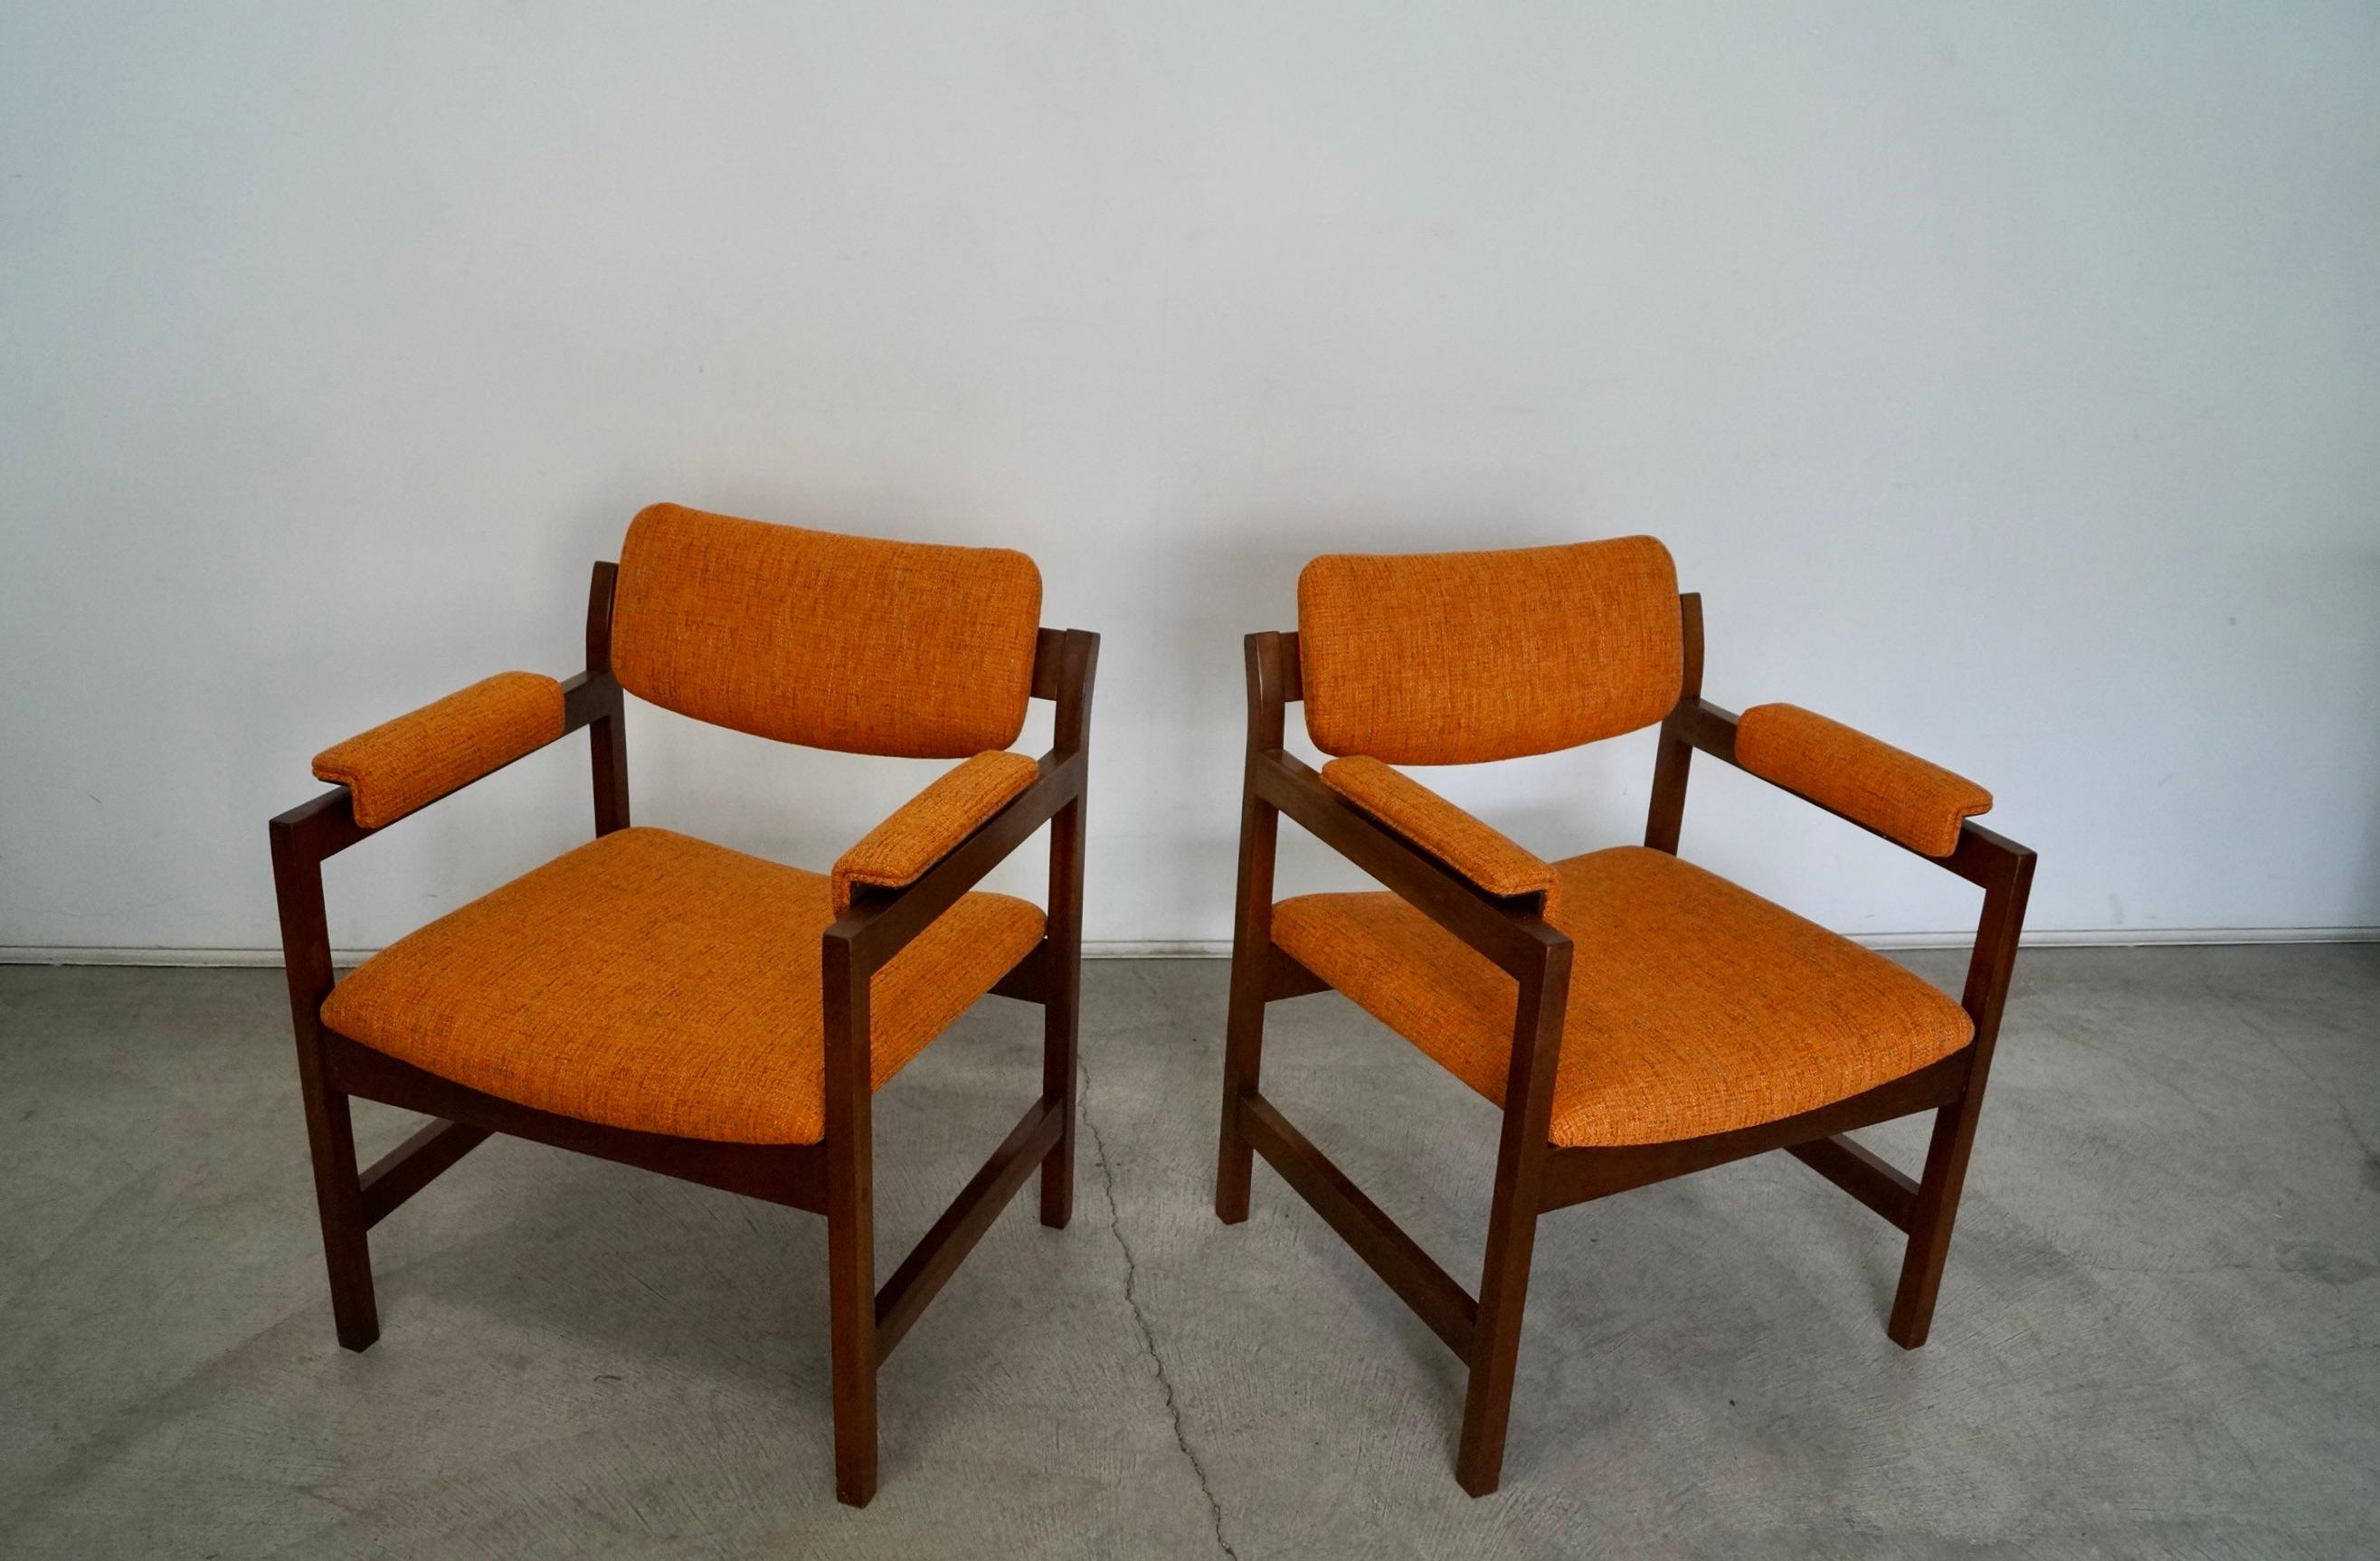 Pair of 1960s Mid-Century Modern Armchairs in Knoll Fabric In Excellent Condition For Sale In Burbank, CA